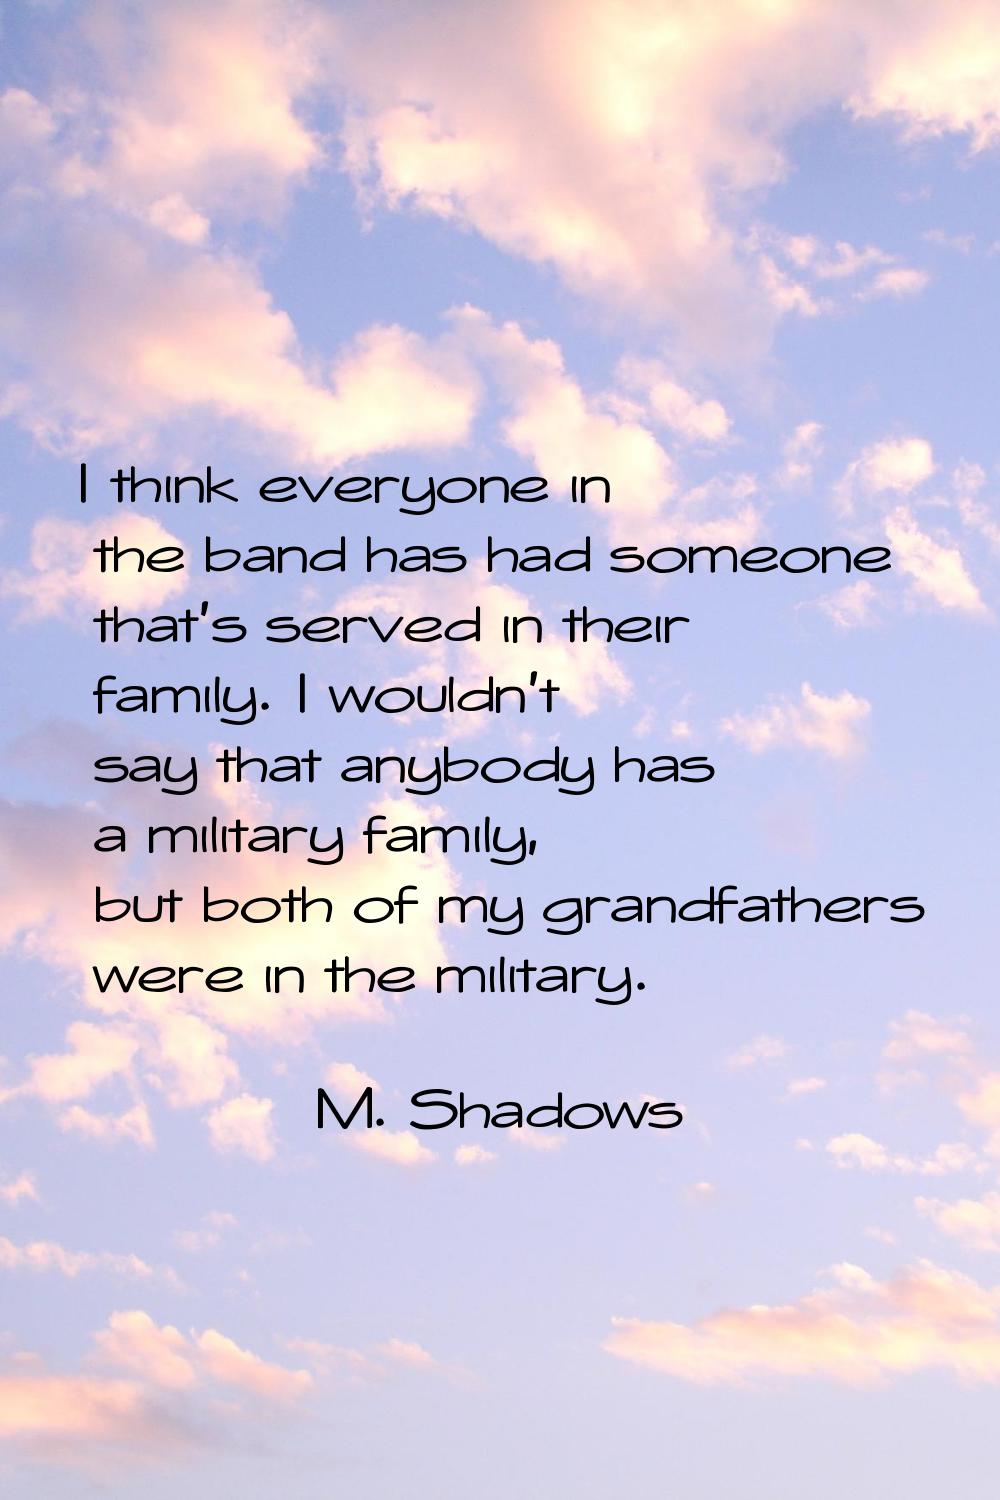 I think everyone in the band has had someone that's served in their family. I wouldn't say that any